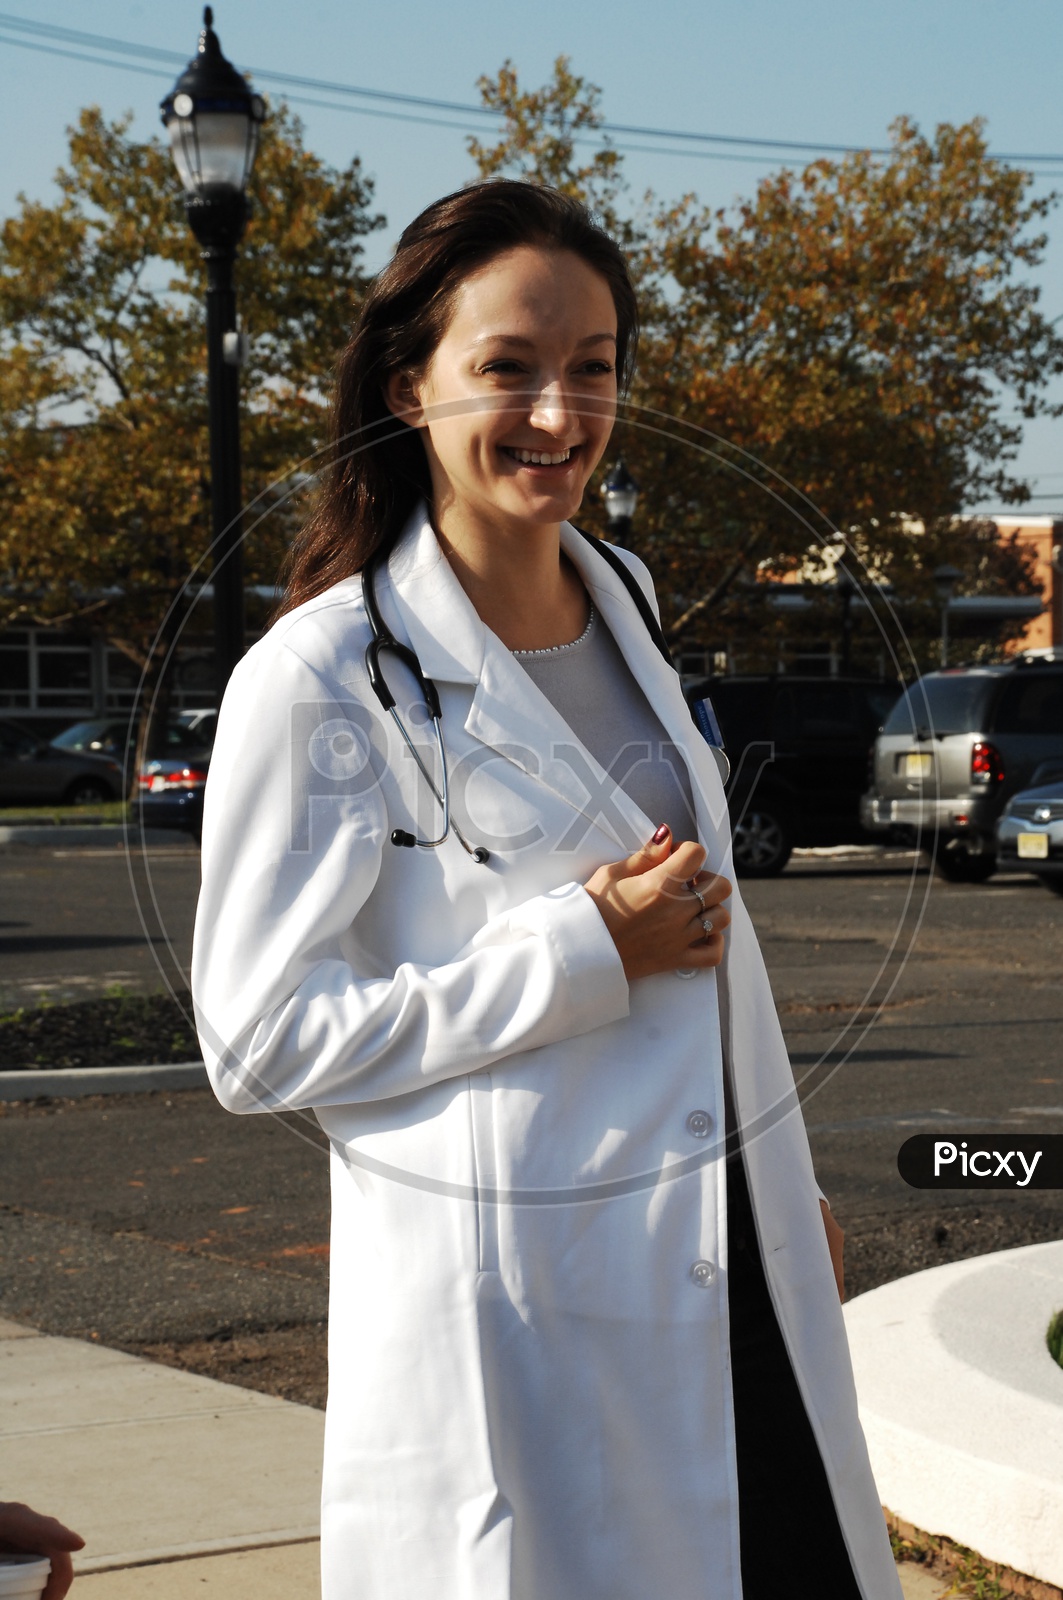 A smiling female doctor with stethoscope wearing a long white coat